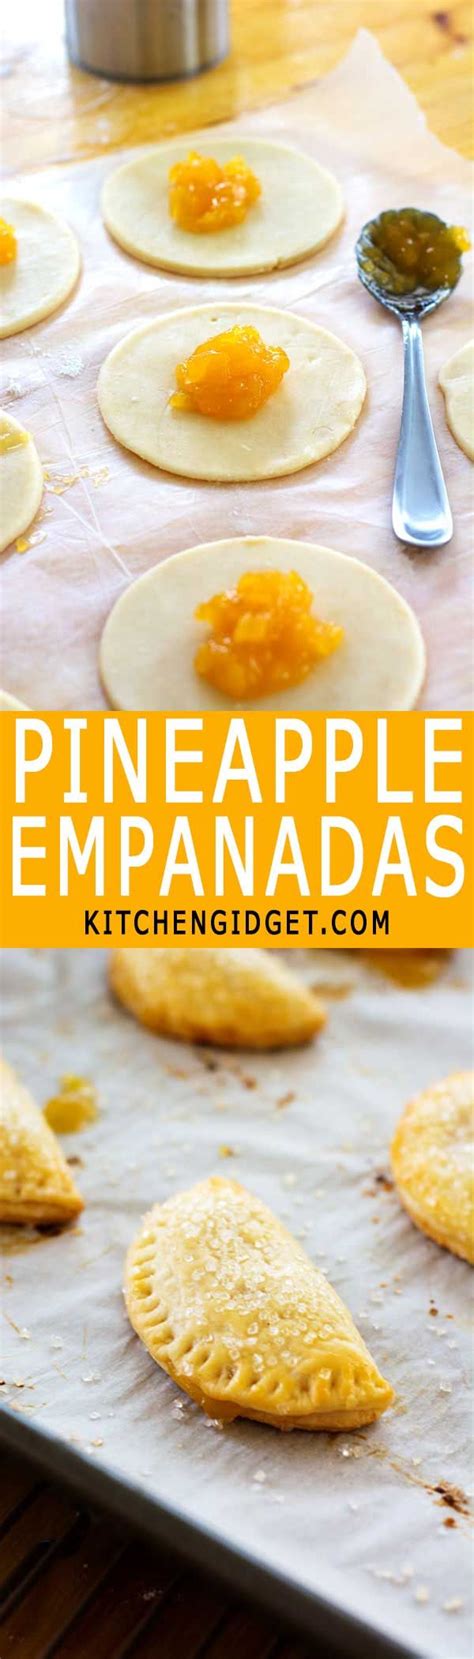 These Tasty Little Pineapple Empanadas Are A Breeze To Make With Only